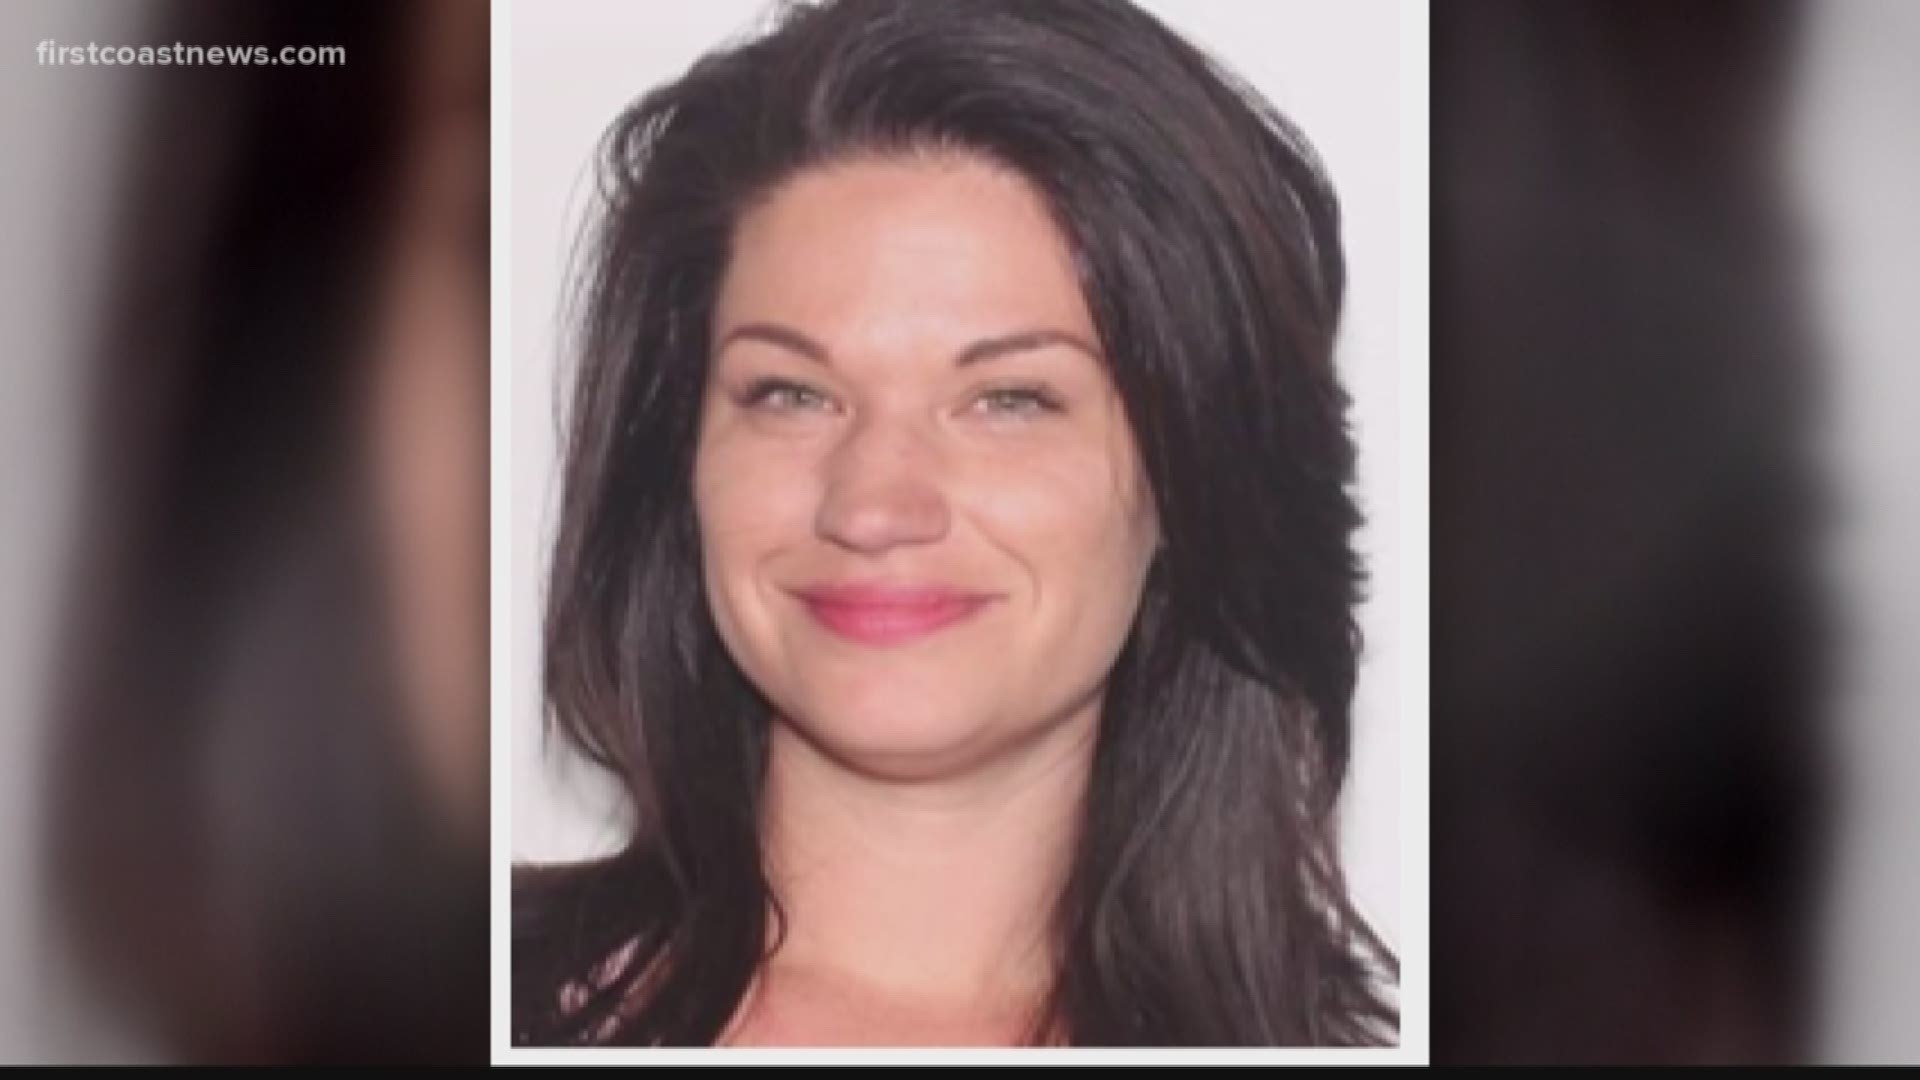 Police say Krystal Lawnick was last seen at her apartment on Atlantic Boulevard.